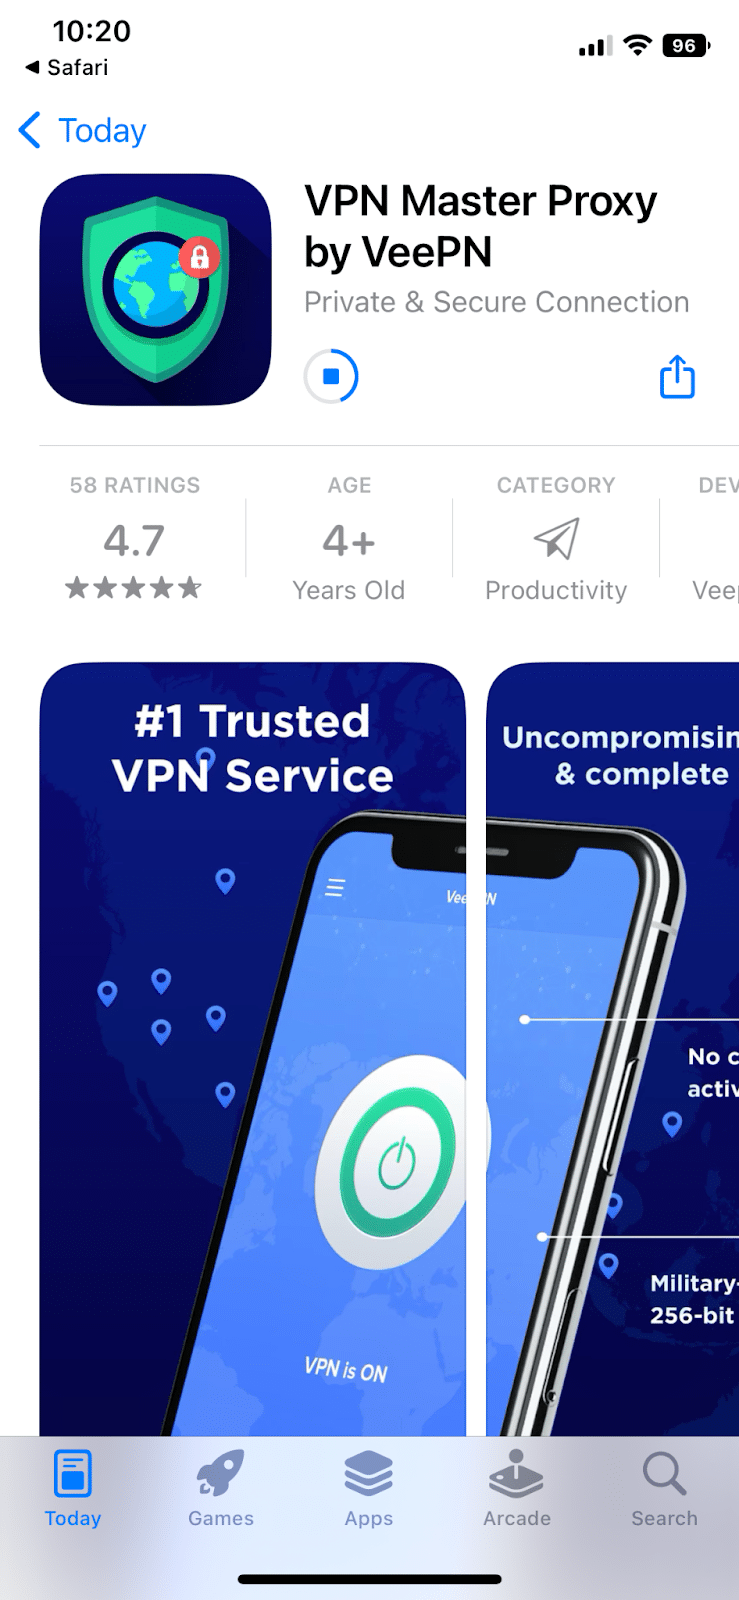 Install VeePN from the App Store